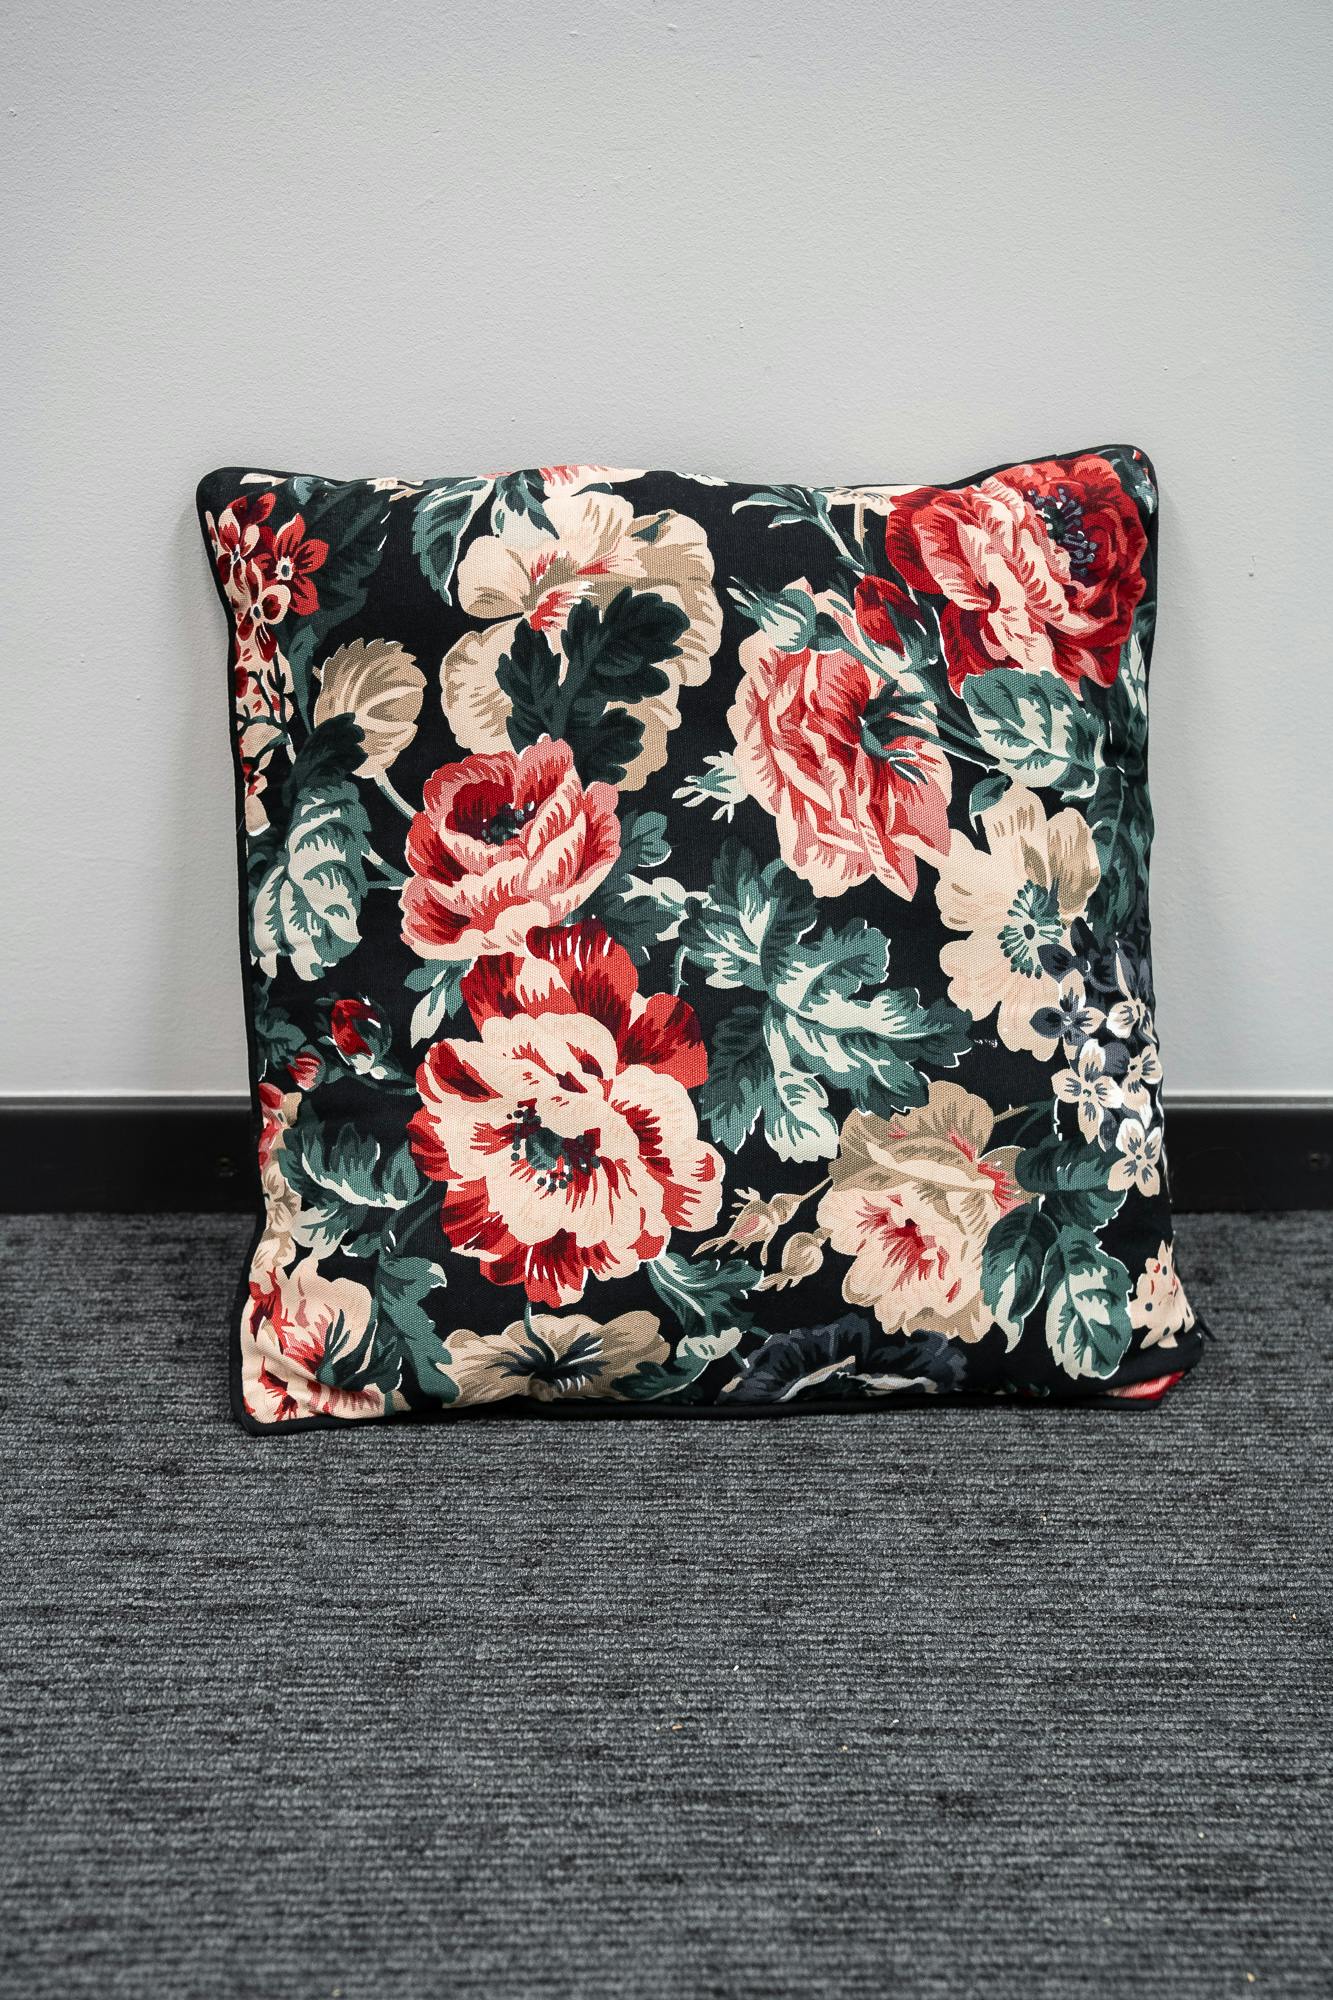  black cushion with floral motifs - Relieve Furniture